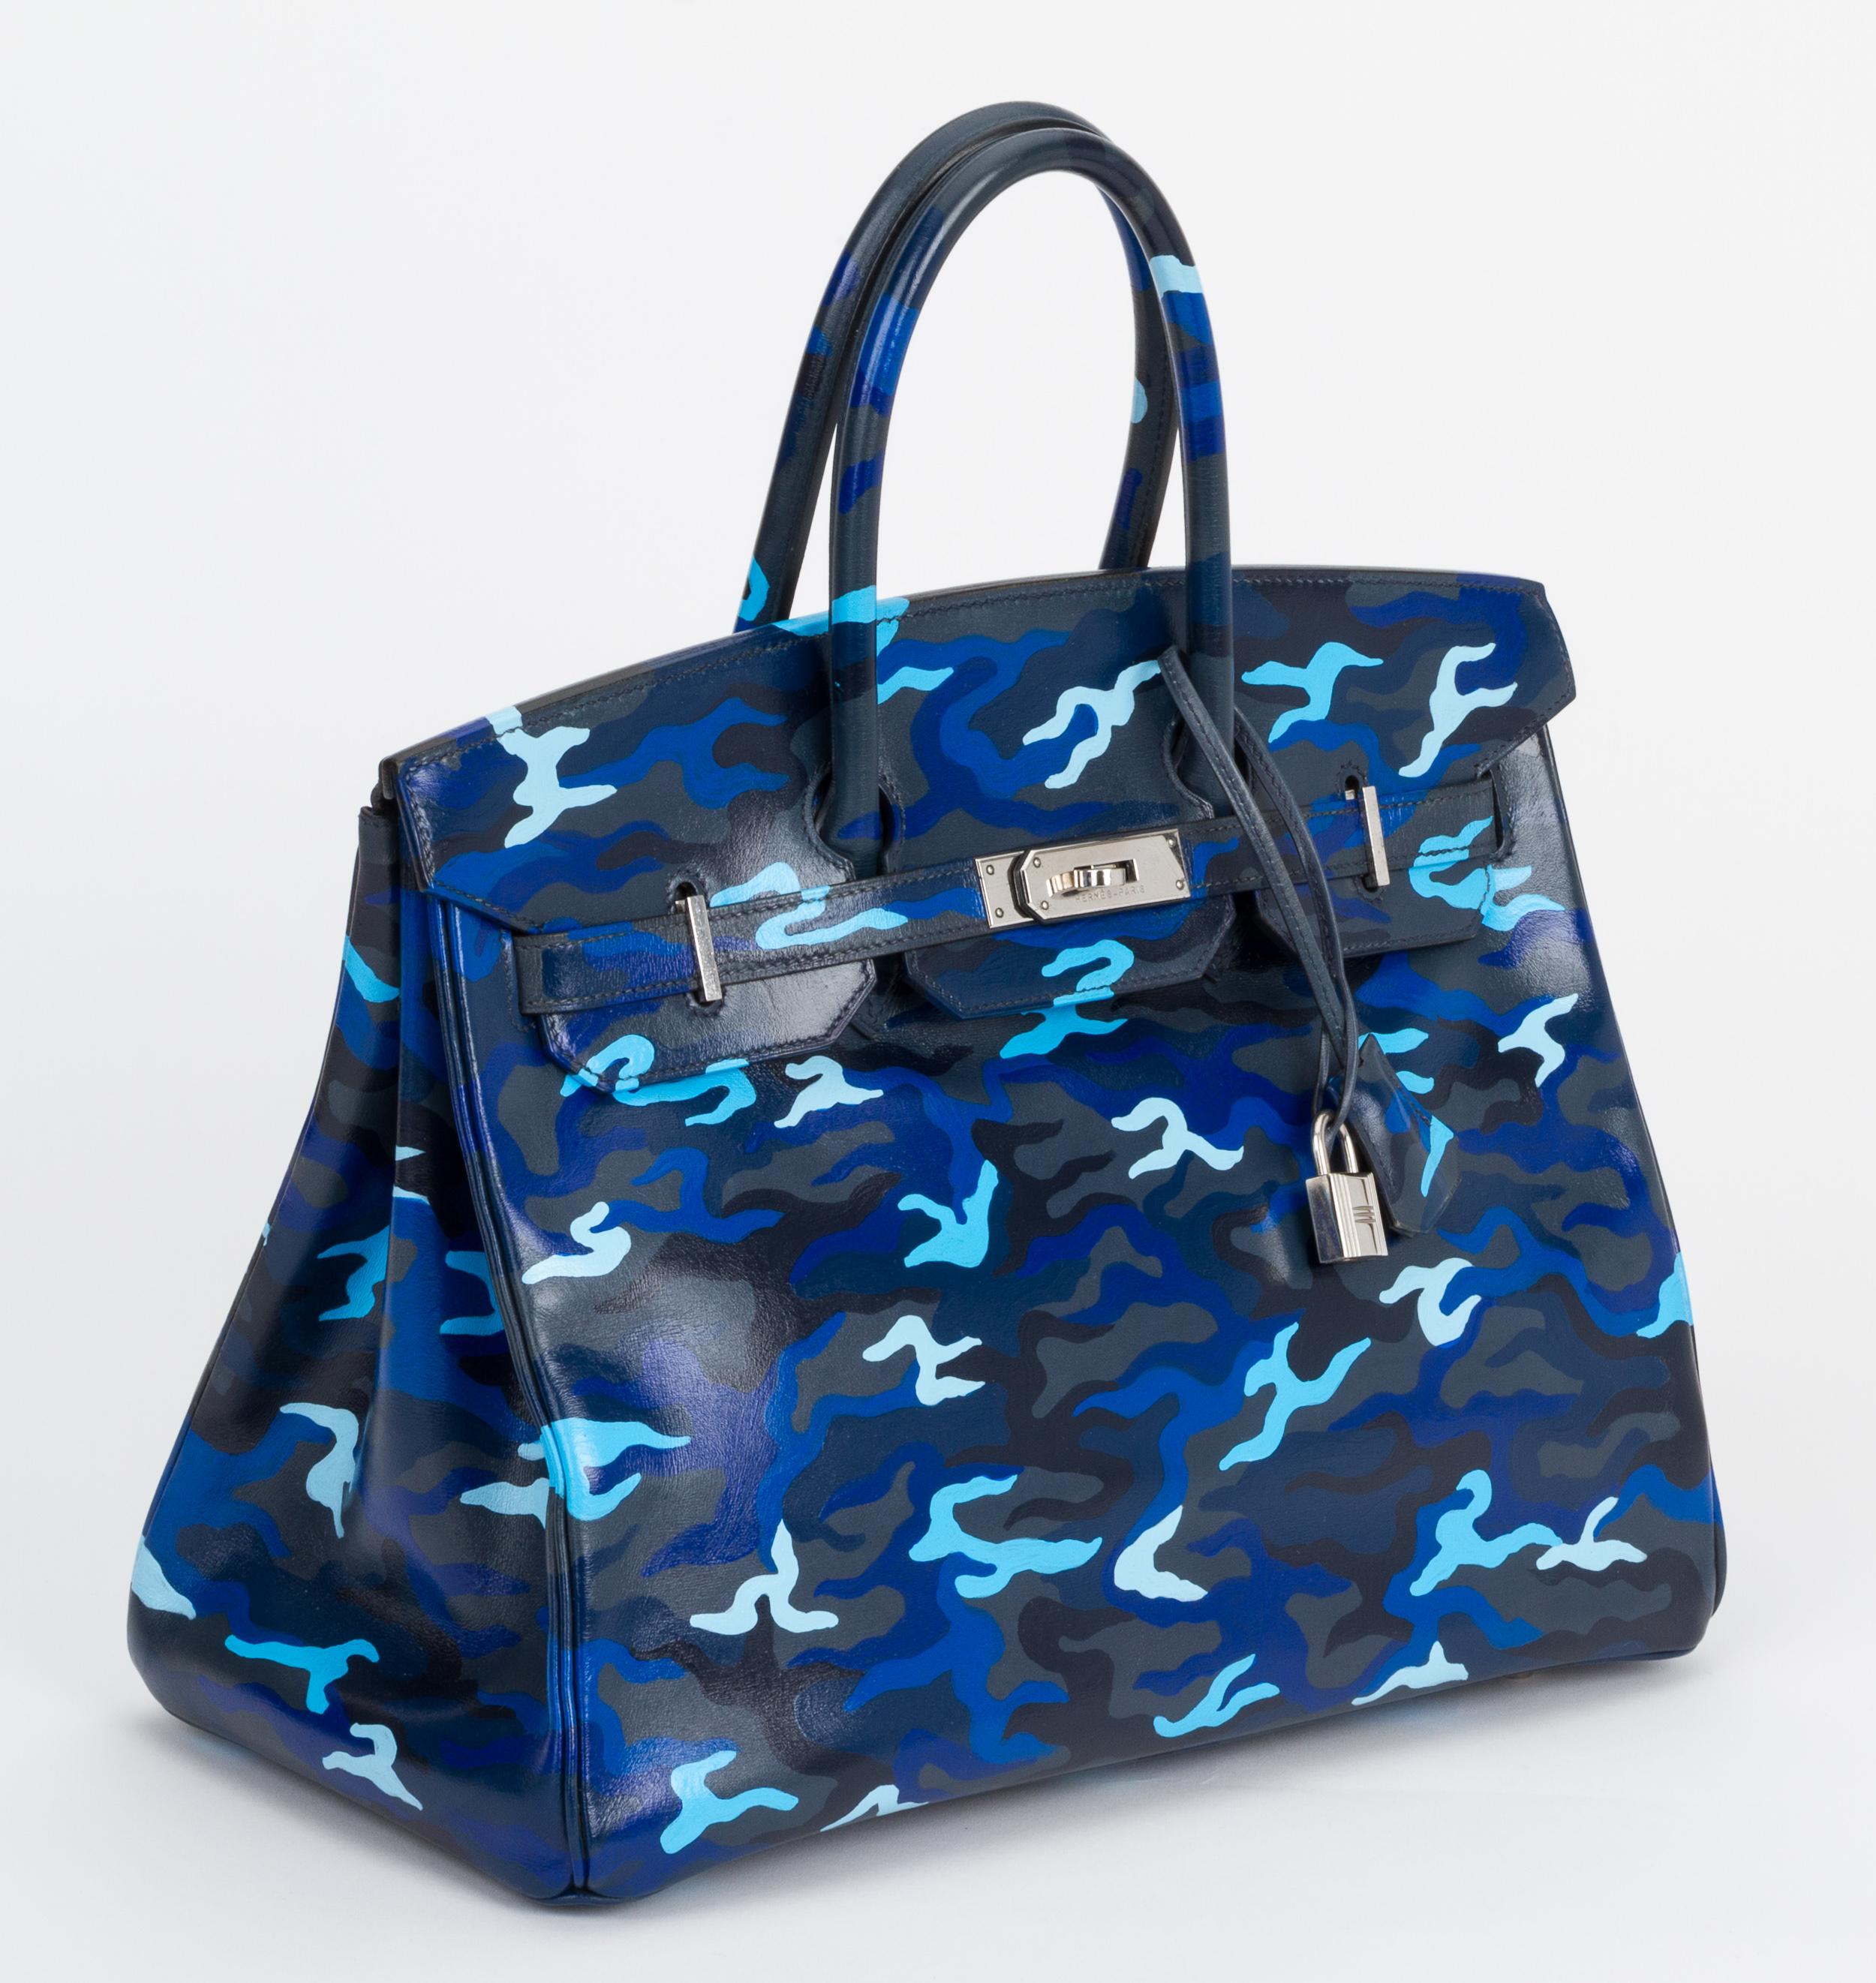 Hermes birkin 35 in blue box calf leather with palladium hardware. The bag has been professionally painted by an artist in camouflage design in various shades of blue. One of a kind handbag. Date stamp E for 2001. Comes with original dust cover.